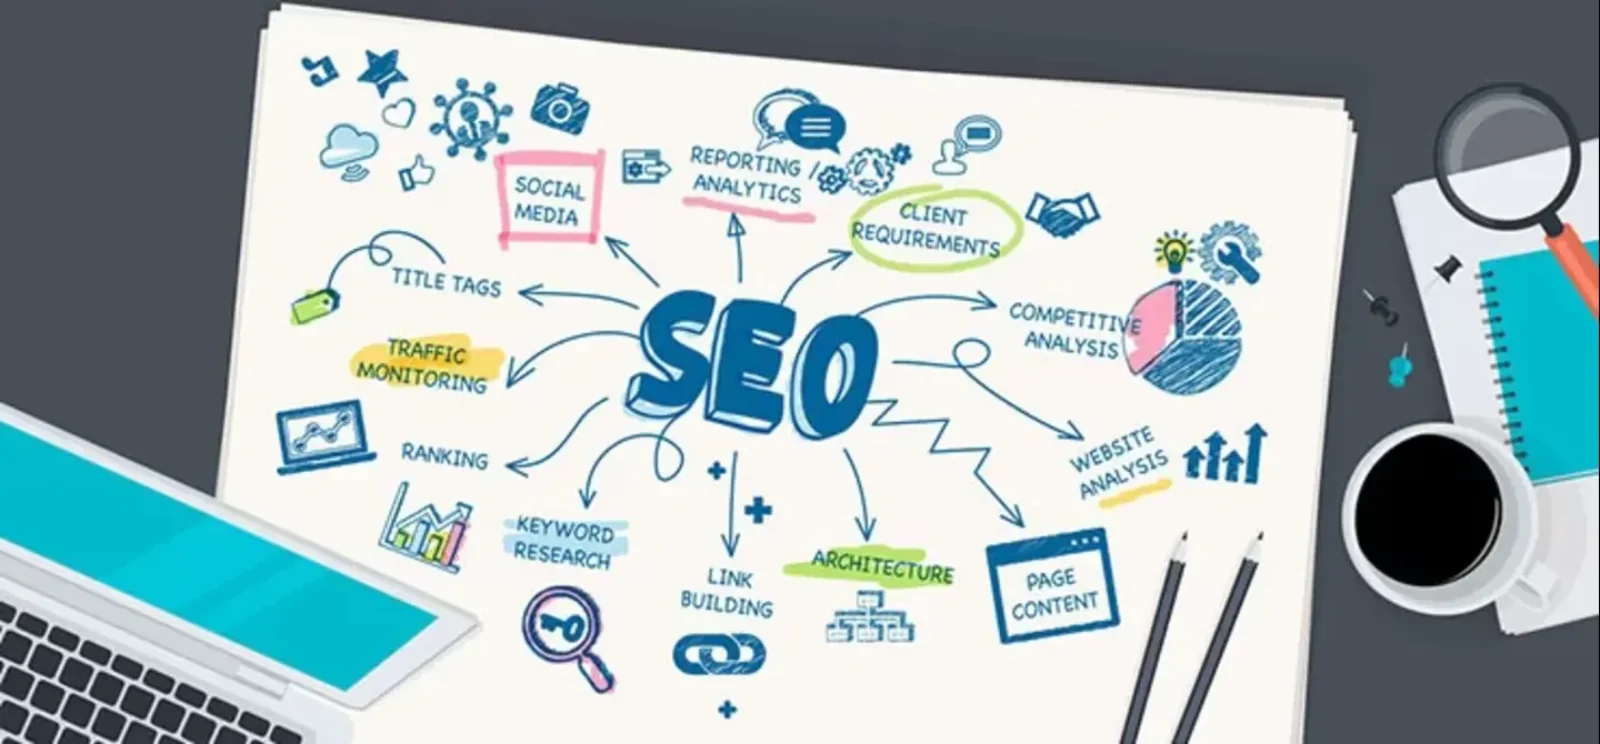 Seo services by infinitee clicks, top digital marketing company in indore